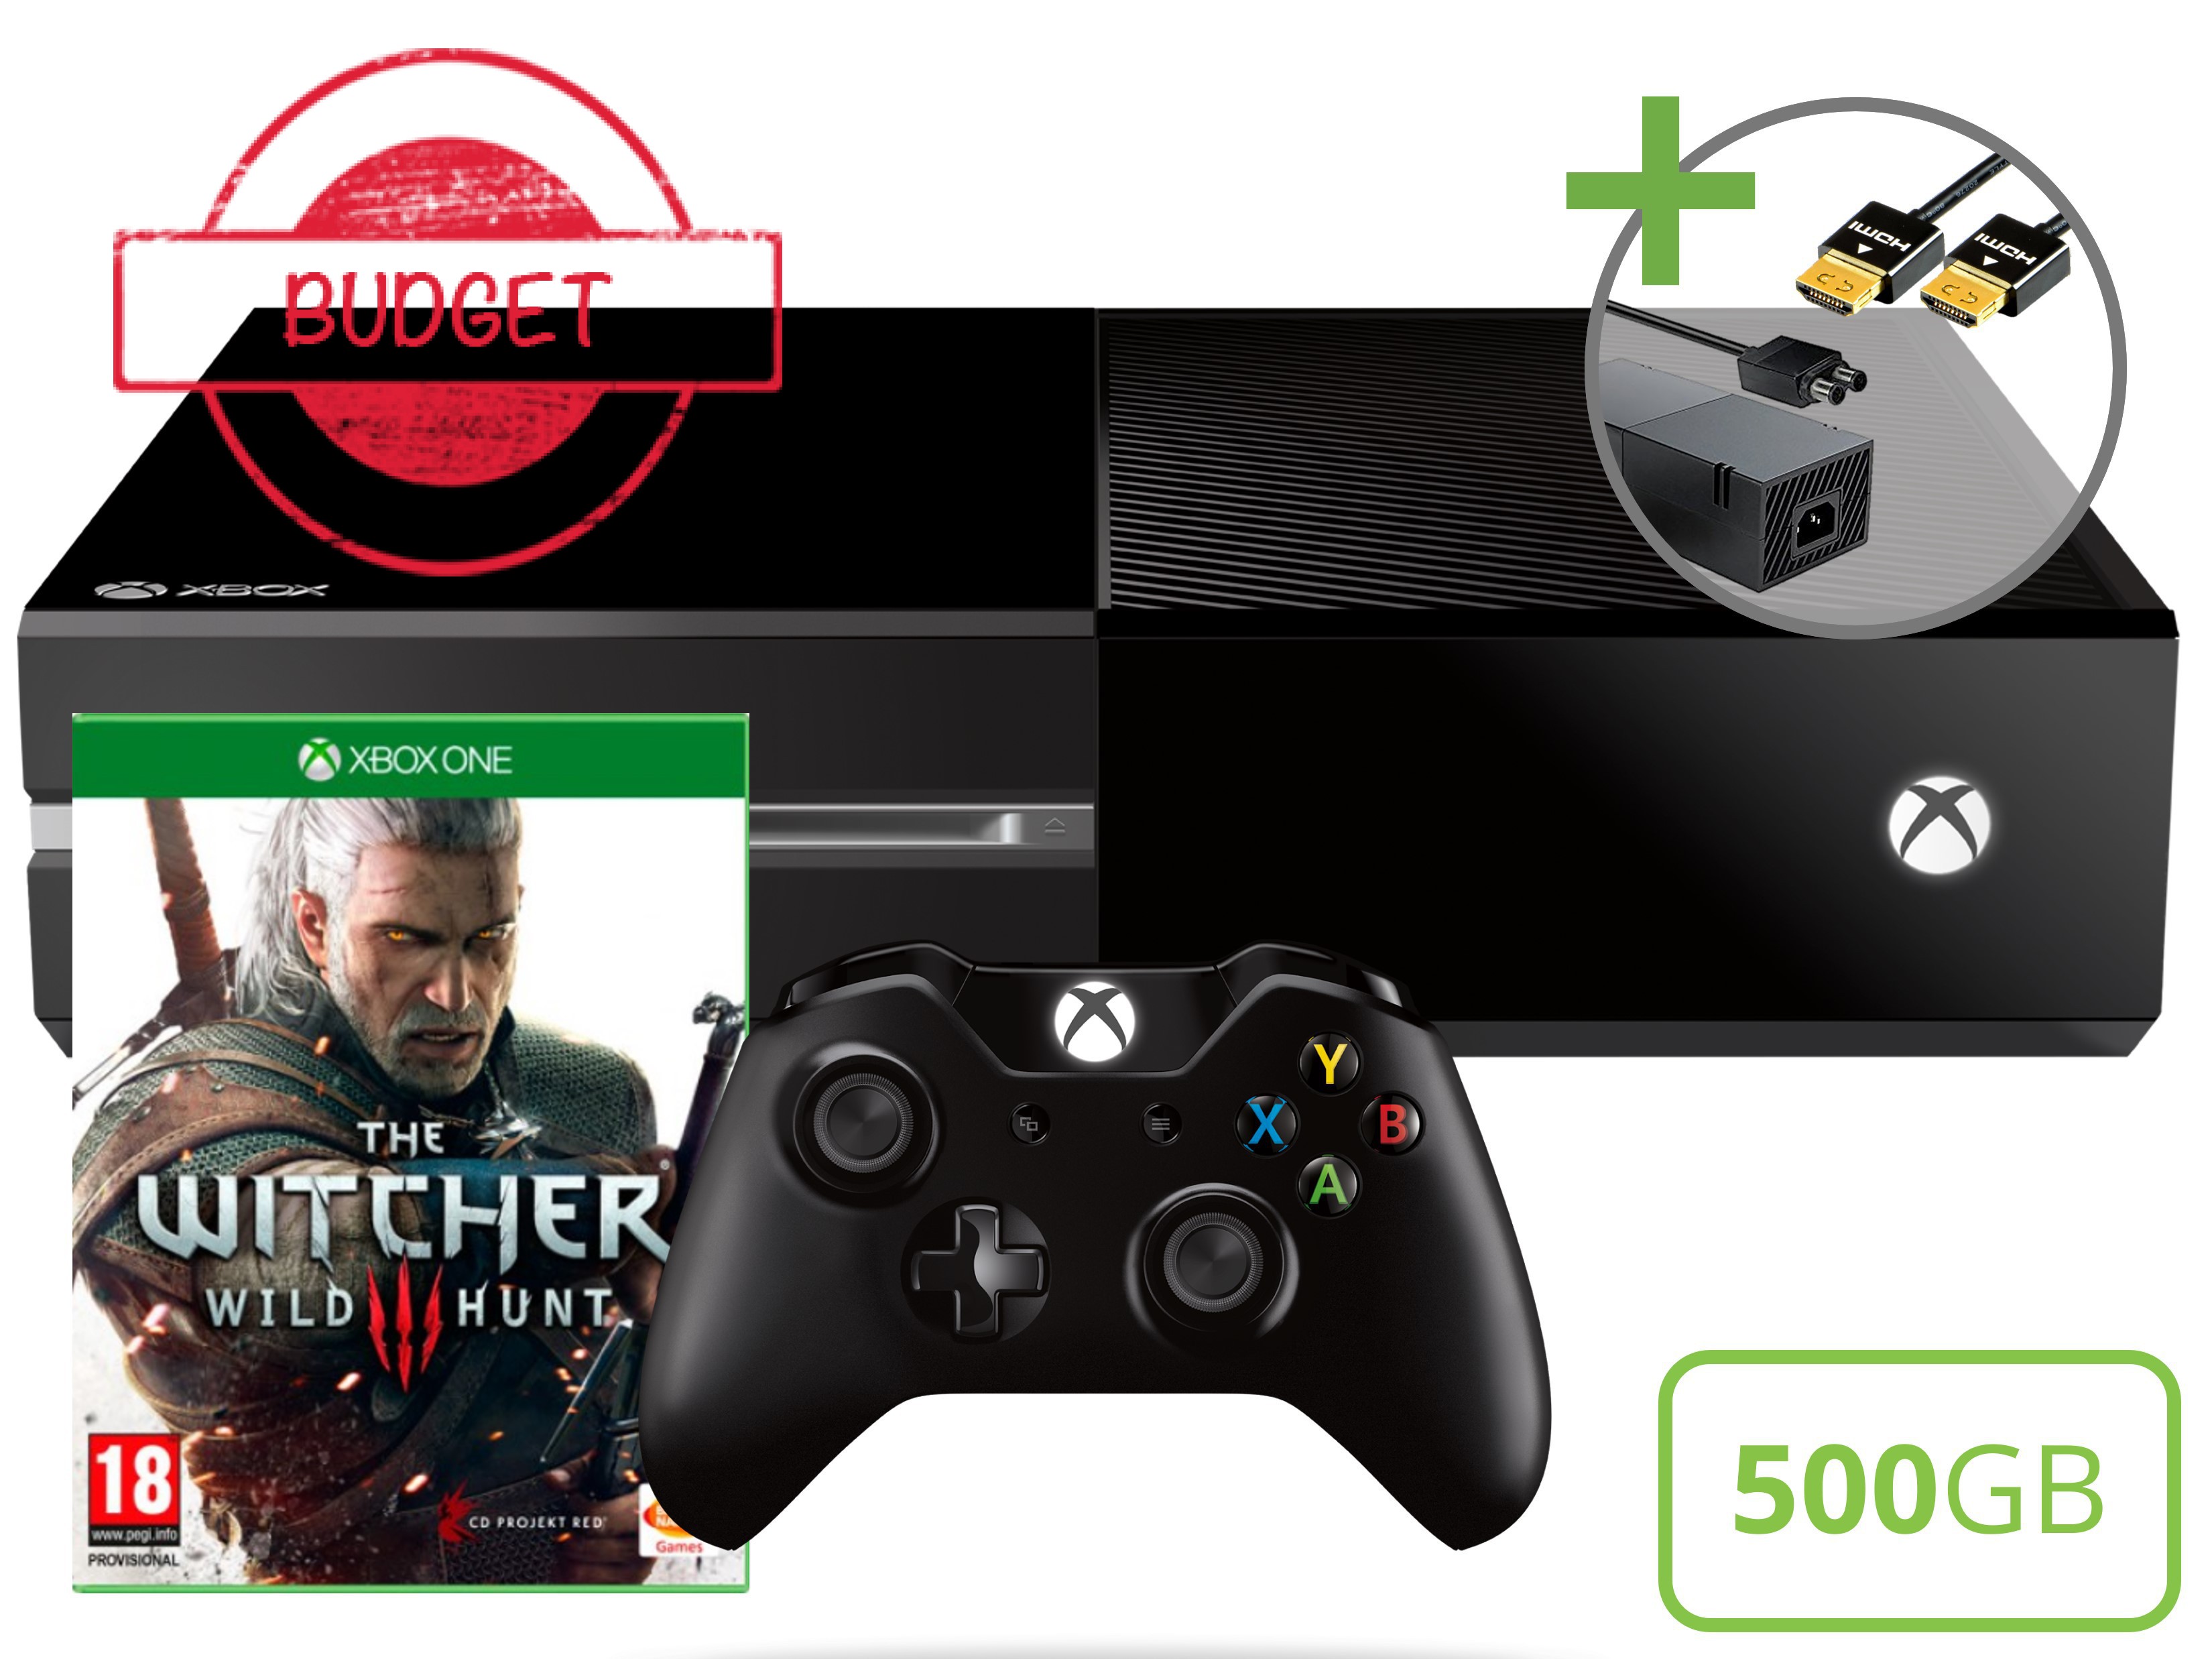 Microsoft Xbox One Starter Pack - 500GB The Witcher 3 Wild Hunt Edition - Budget Kopen | Xbox One Hardware